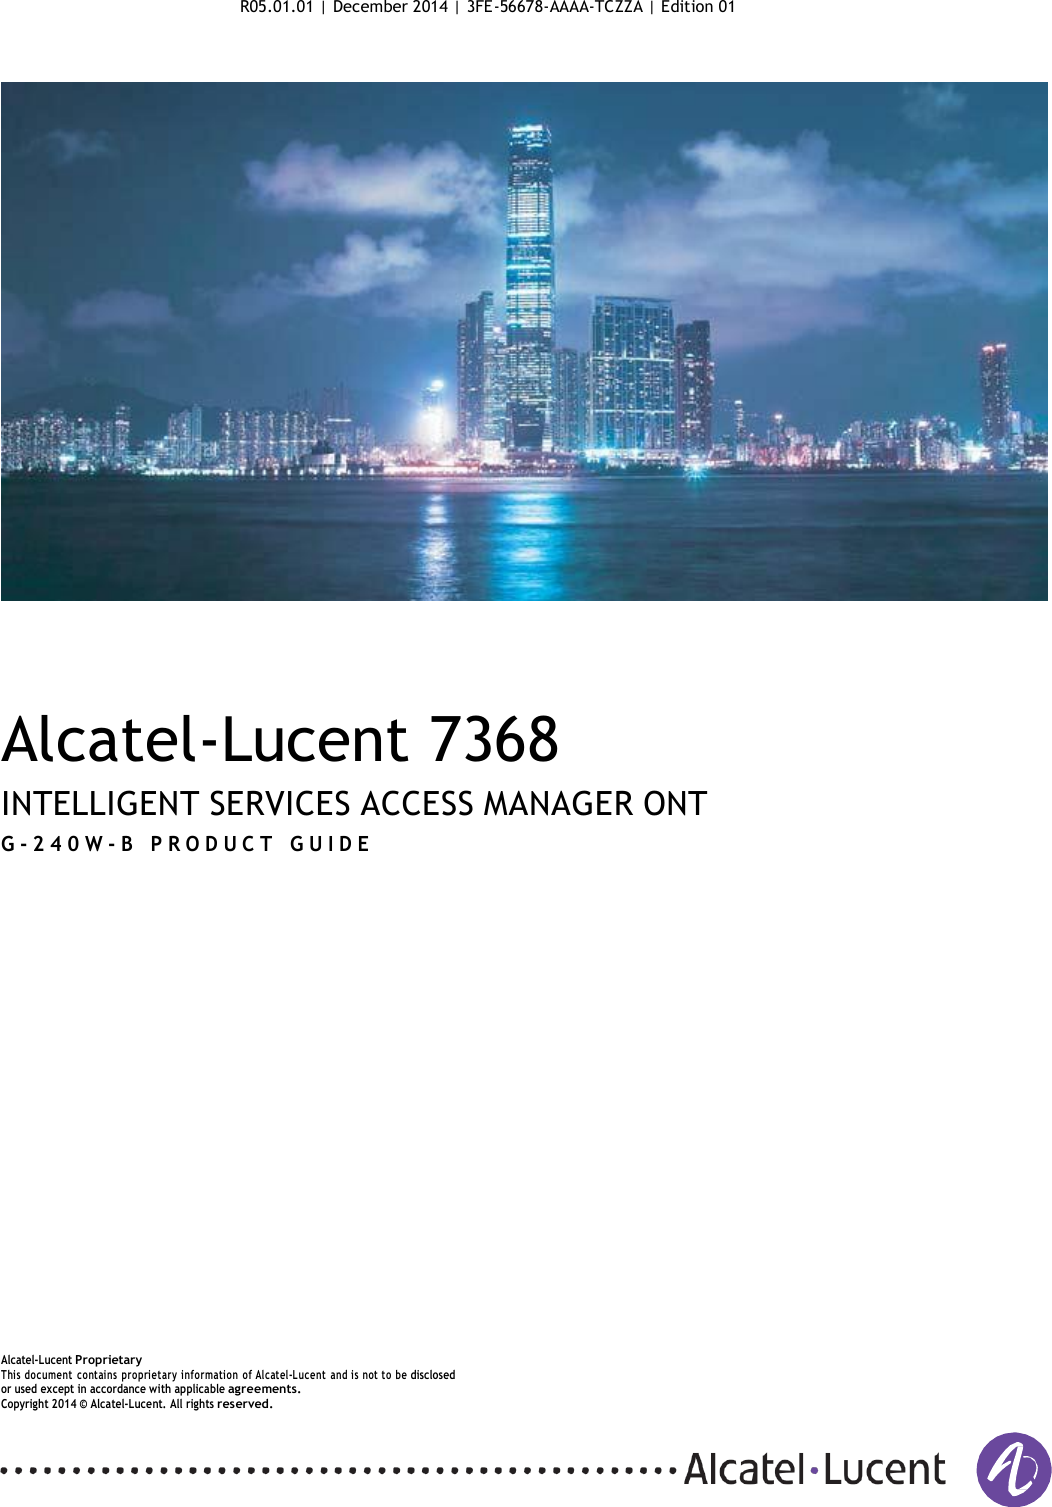 R05.01.01 | December 2014 | 3FE-56678-AAAA-TCZZA | Edition 01           Alcatel-Lucent 7368  INTELLIGENT SERVICES ACCESS MANAGER ONT G - 2 40W- B   P R O D U C T   G U IDE                          Alcatel-Lucent Proprietary This  document contains  proprietary information  of Alcatel-L ucent  and is not to be disclosed or used except in accordance with applicable agreements. Copyright 2014 ©  Alcatel-Lucent. All rights reserved.    